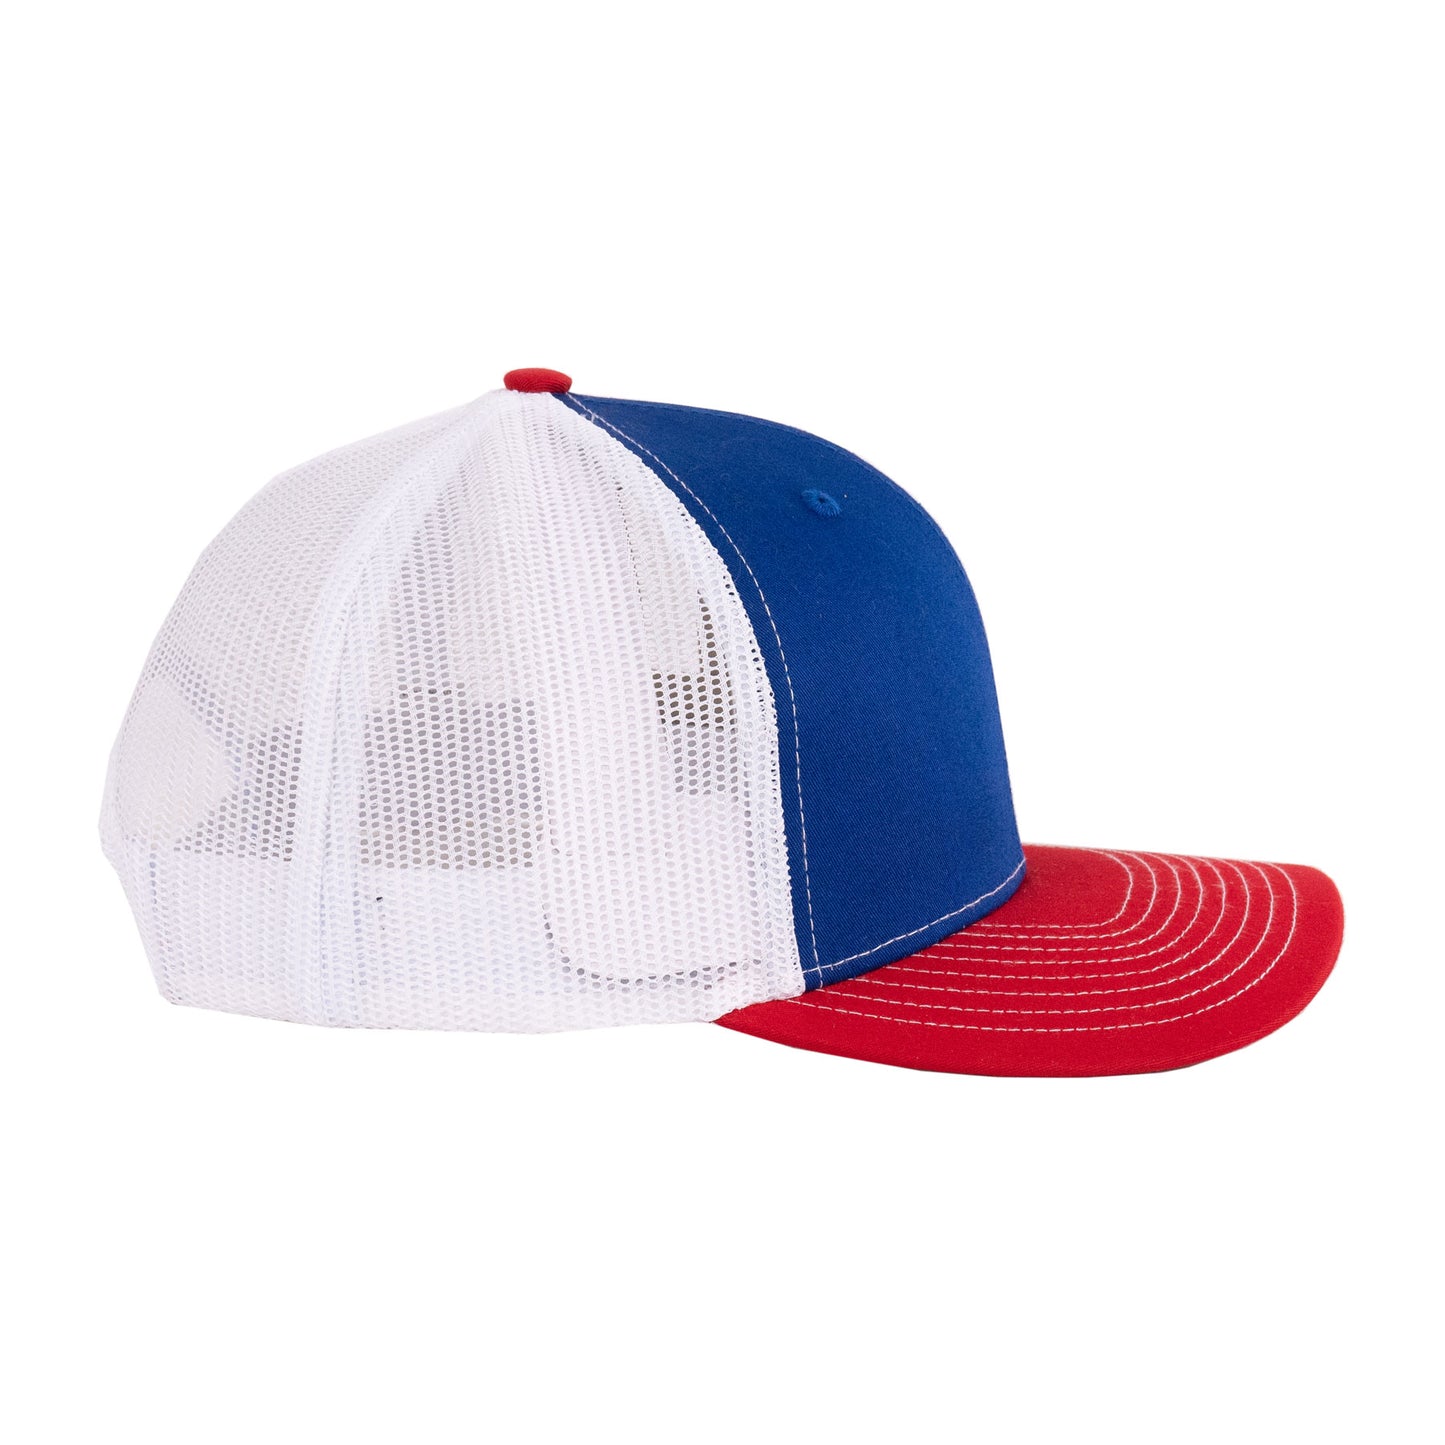 Tanglefree Trucker Hat Red White & Blue